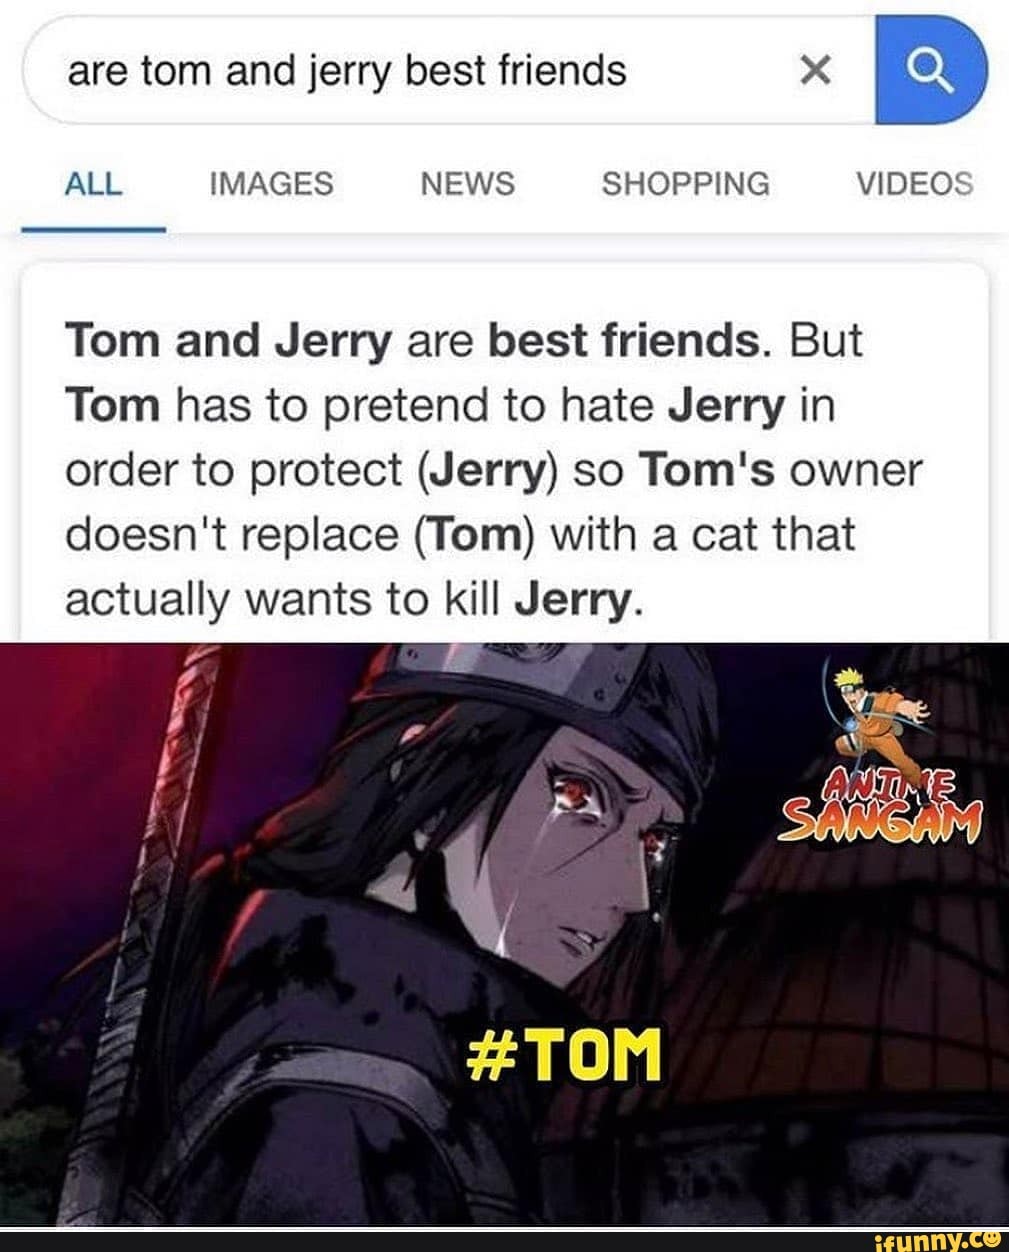 I hate Jerry RIL. Tom has a lot of